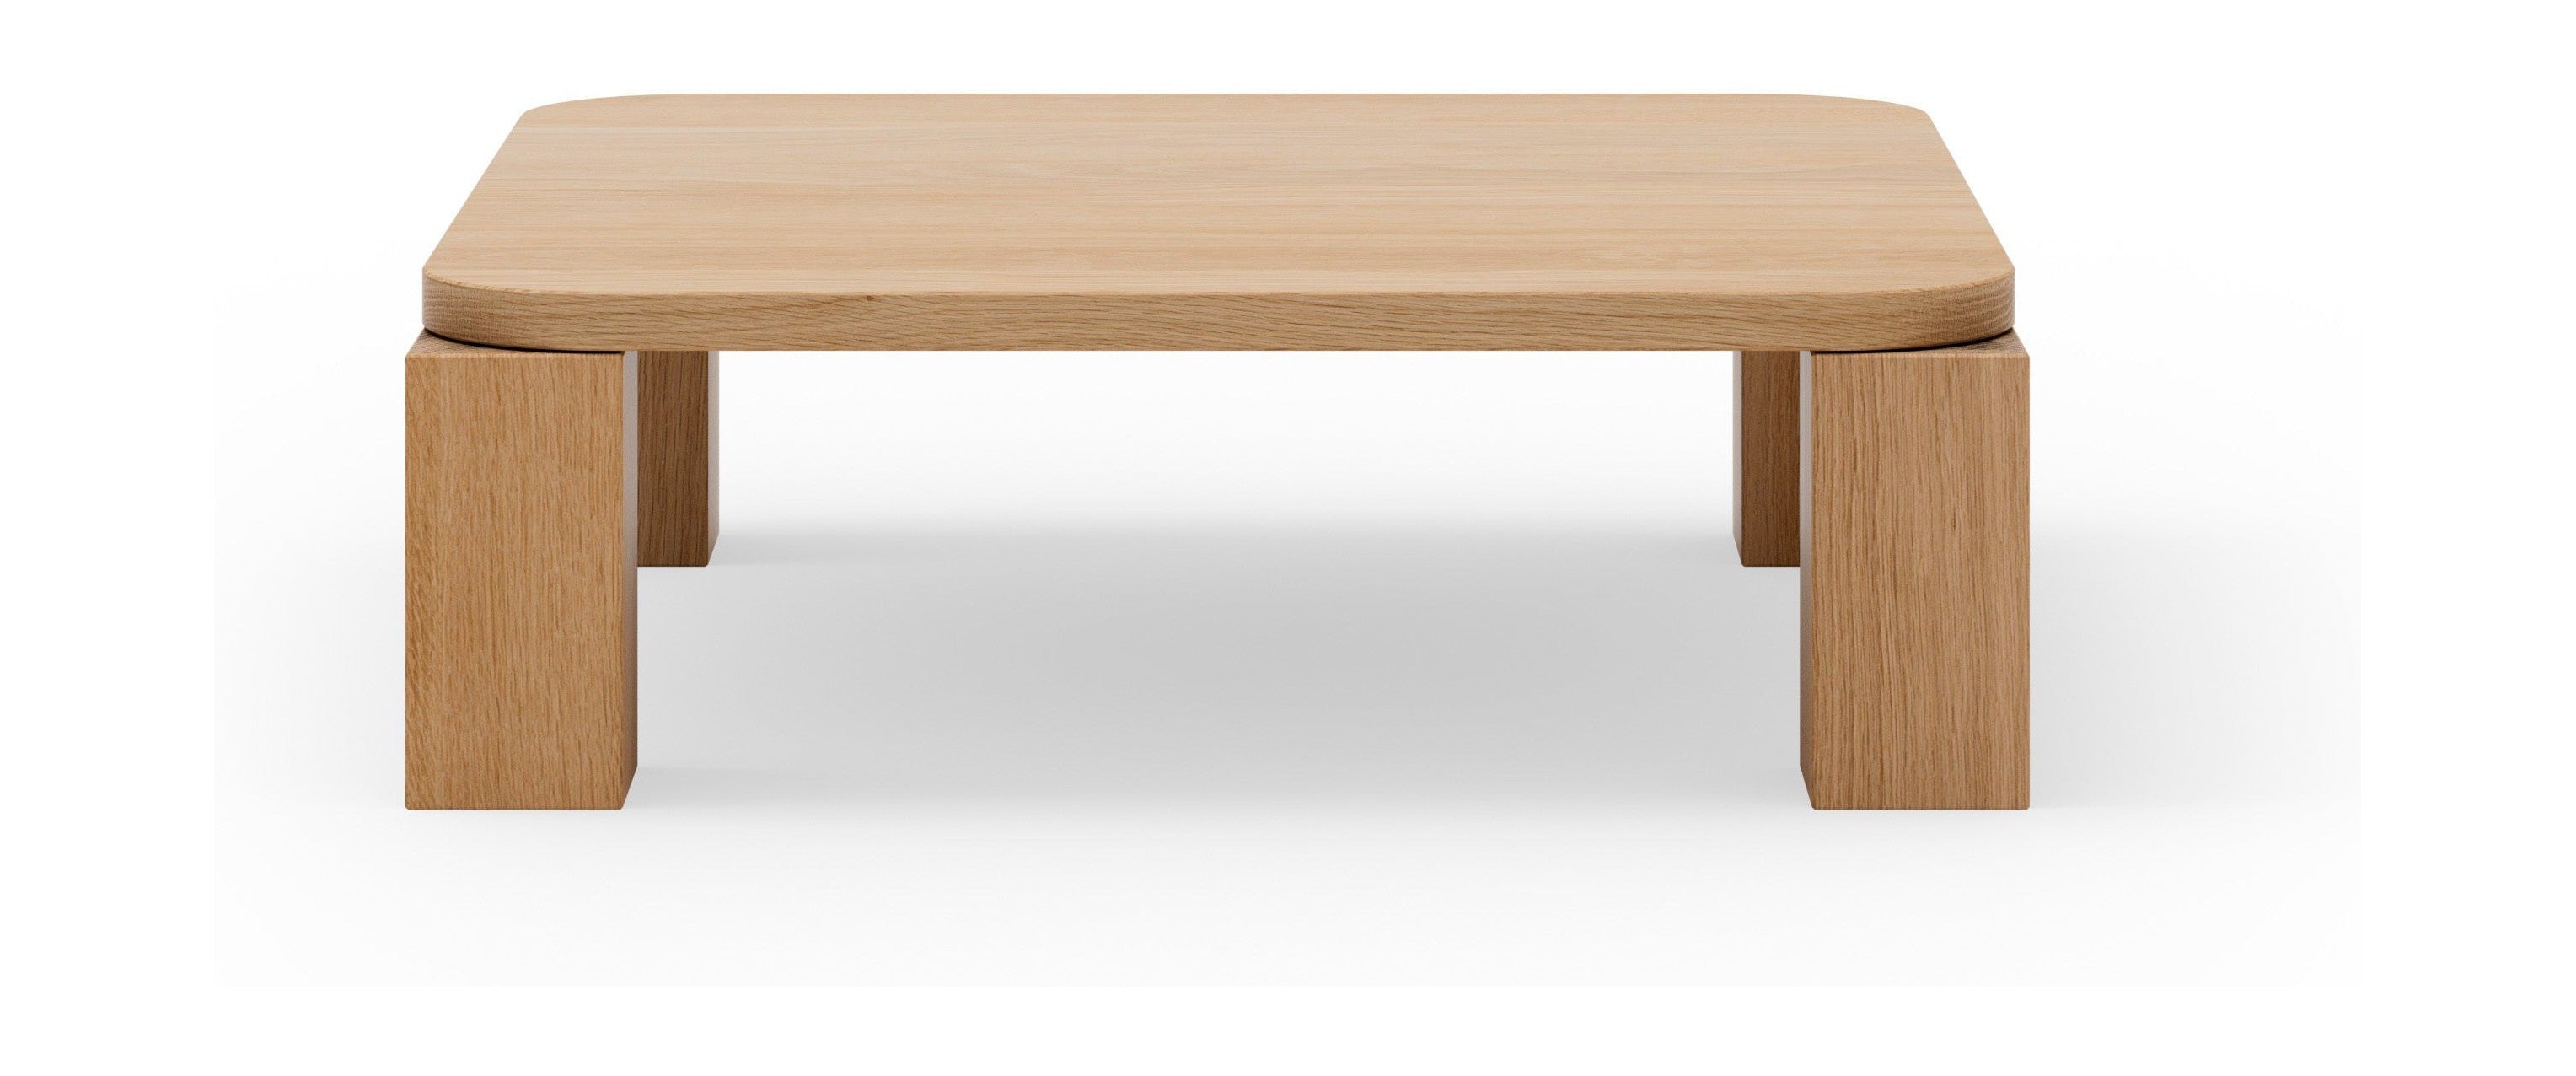 New Works Atlas Coffee Table Natural Oak, 82x82 Cm